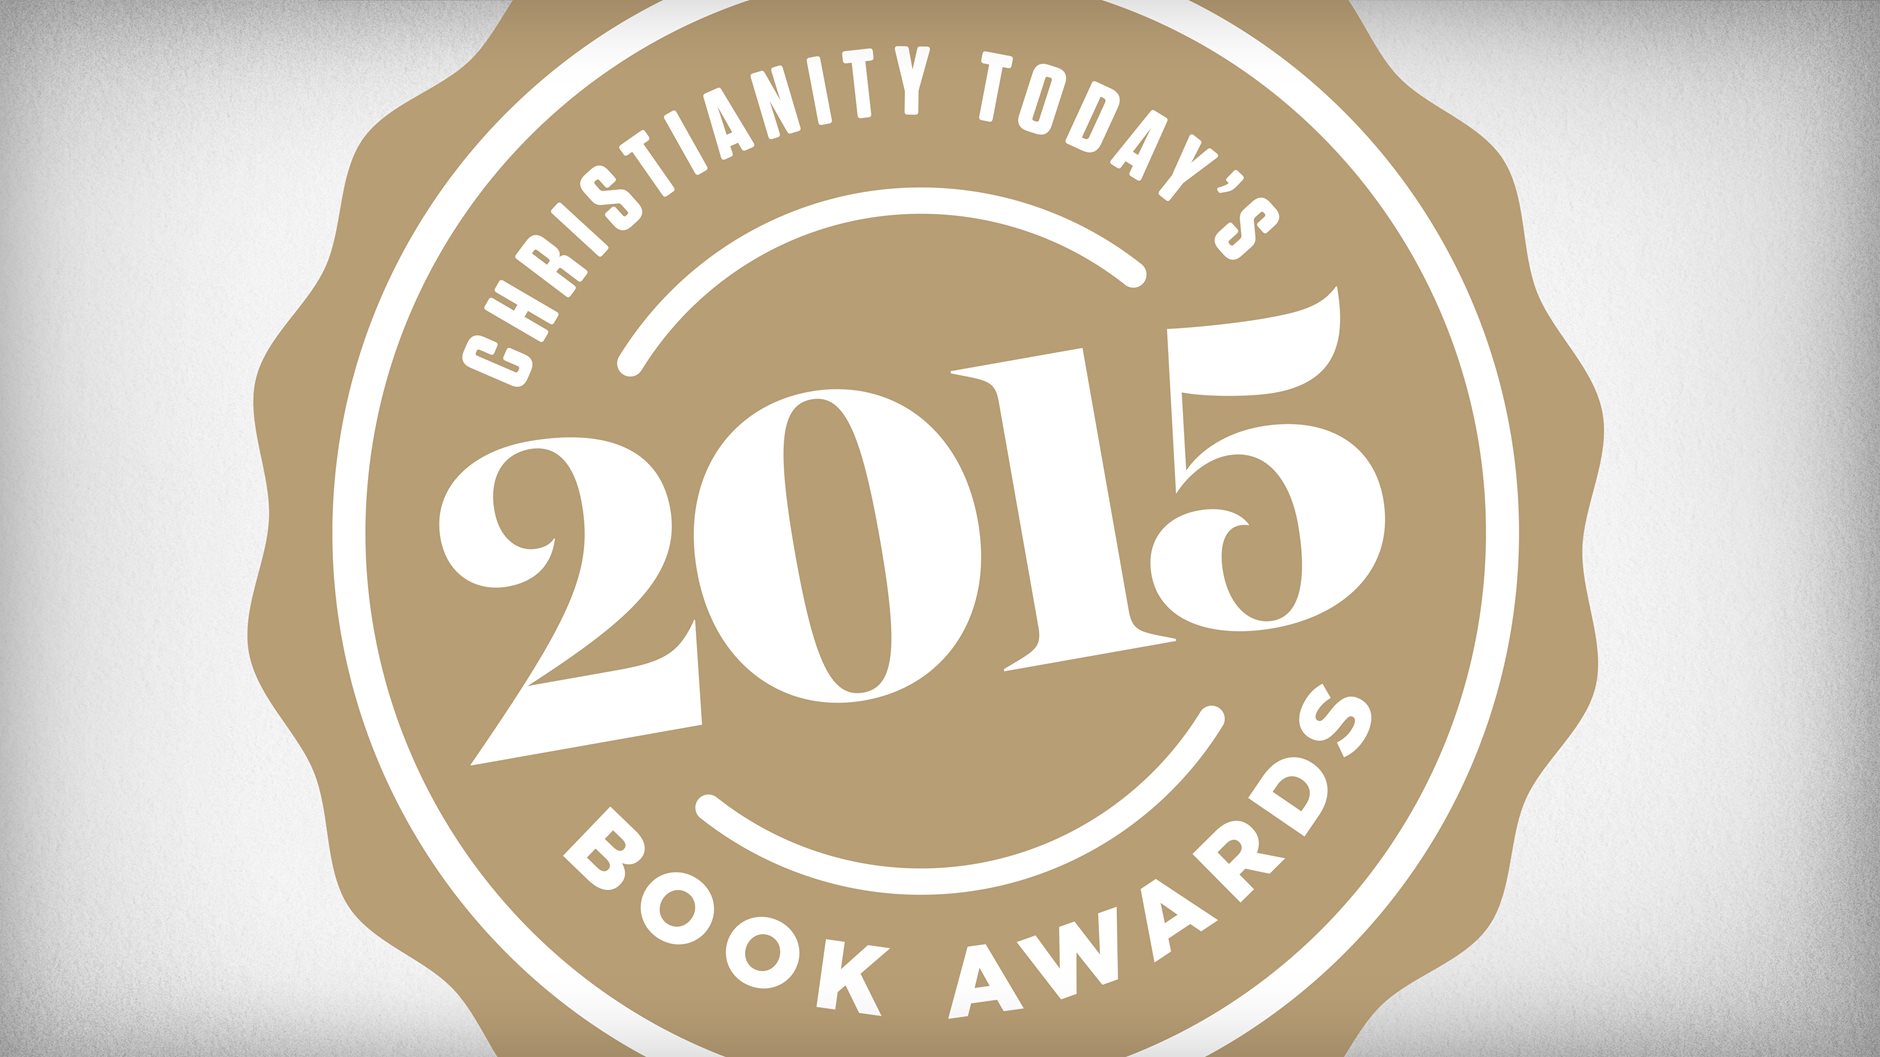 Christianity Today's 2015 Book Awards Christianity Today